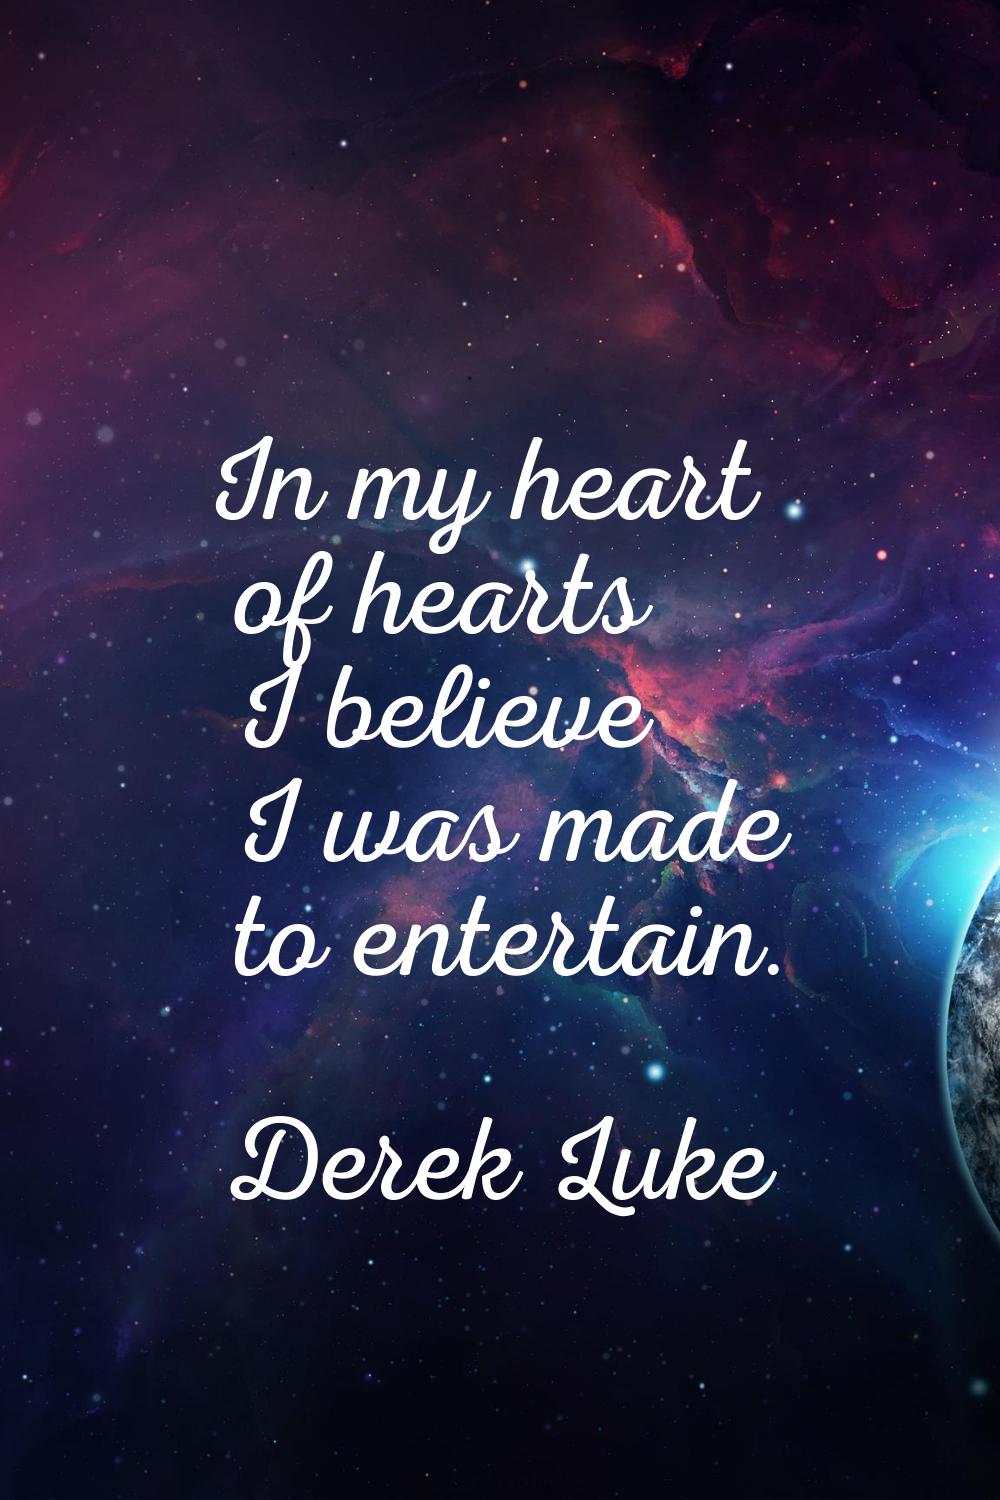 In my heart of hearts I believe I was made to entertain.